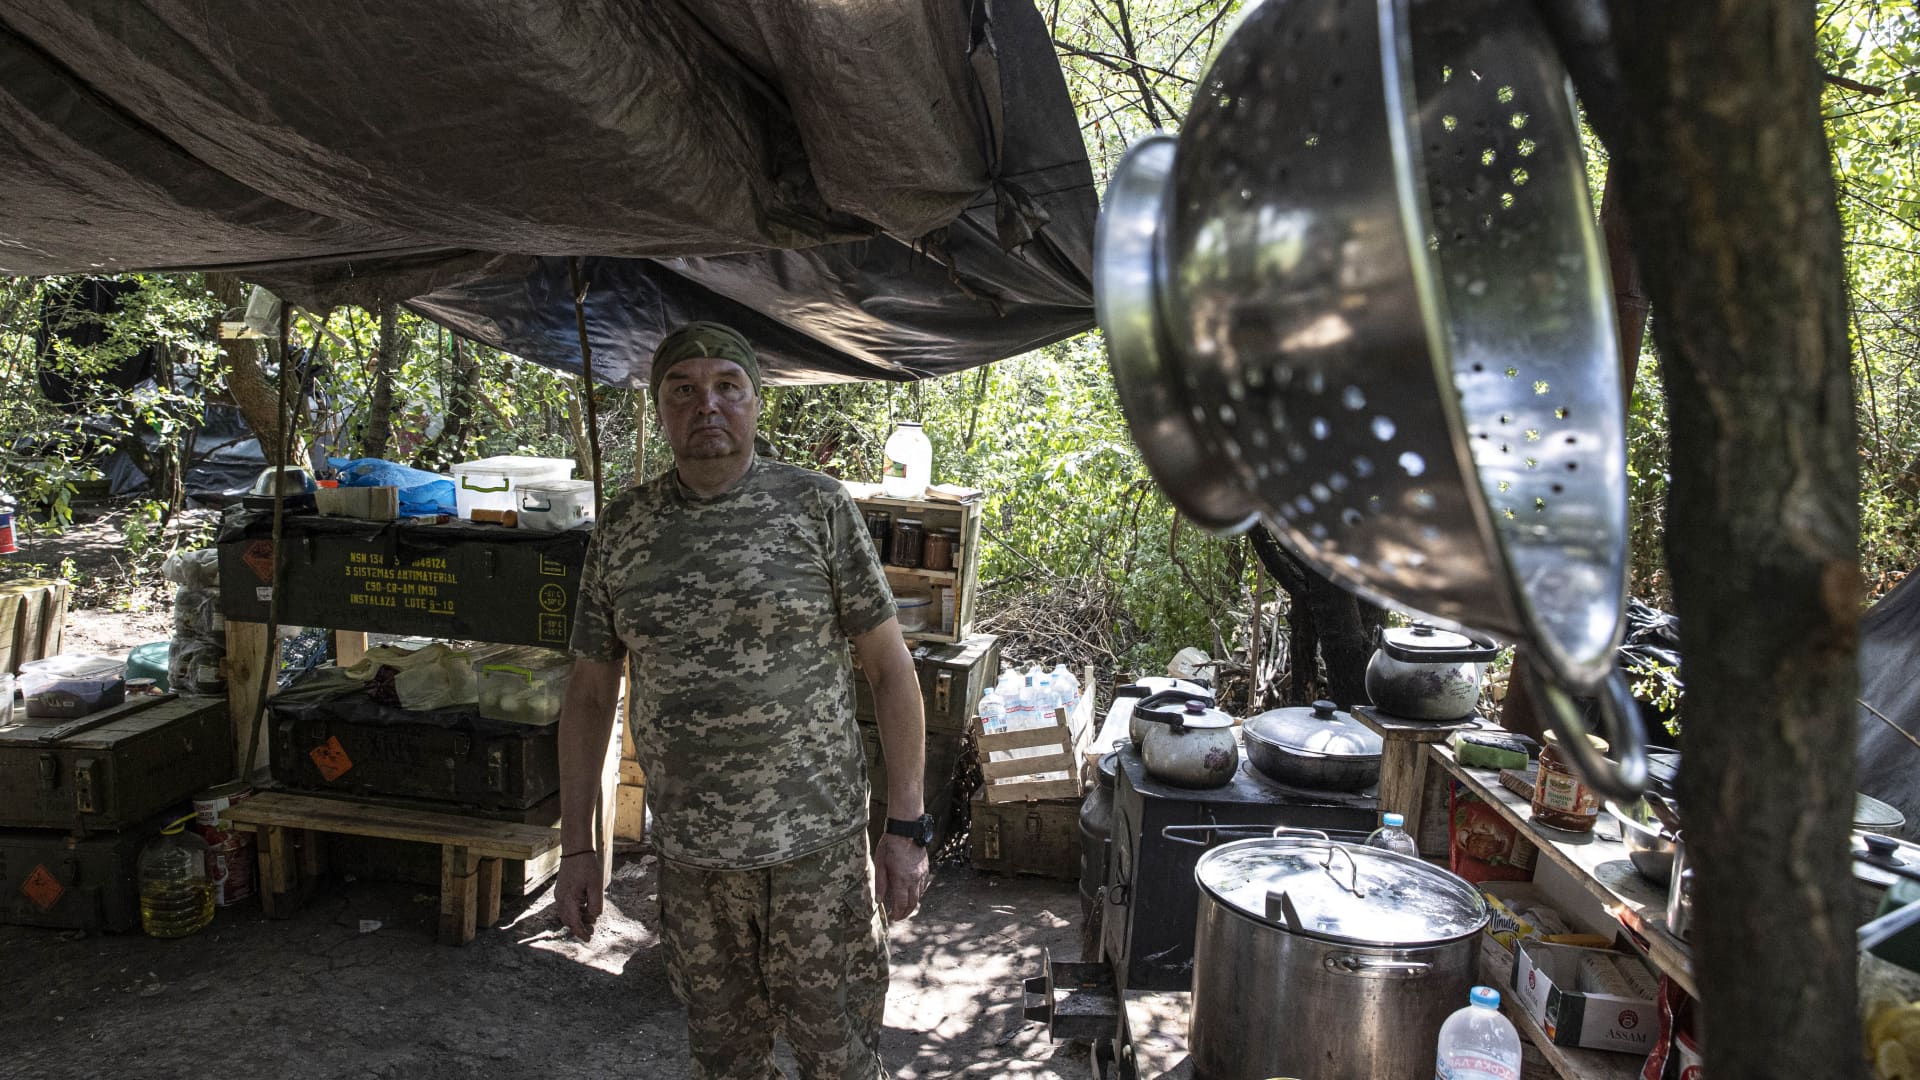 Valodya, a 49-year-old man, volunteers as a cook for Ukrainian soldiers in Kherson, Kherson Oblast, Ukraine on July 15, 2022. 